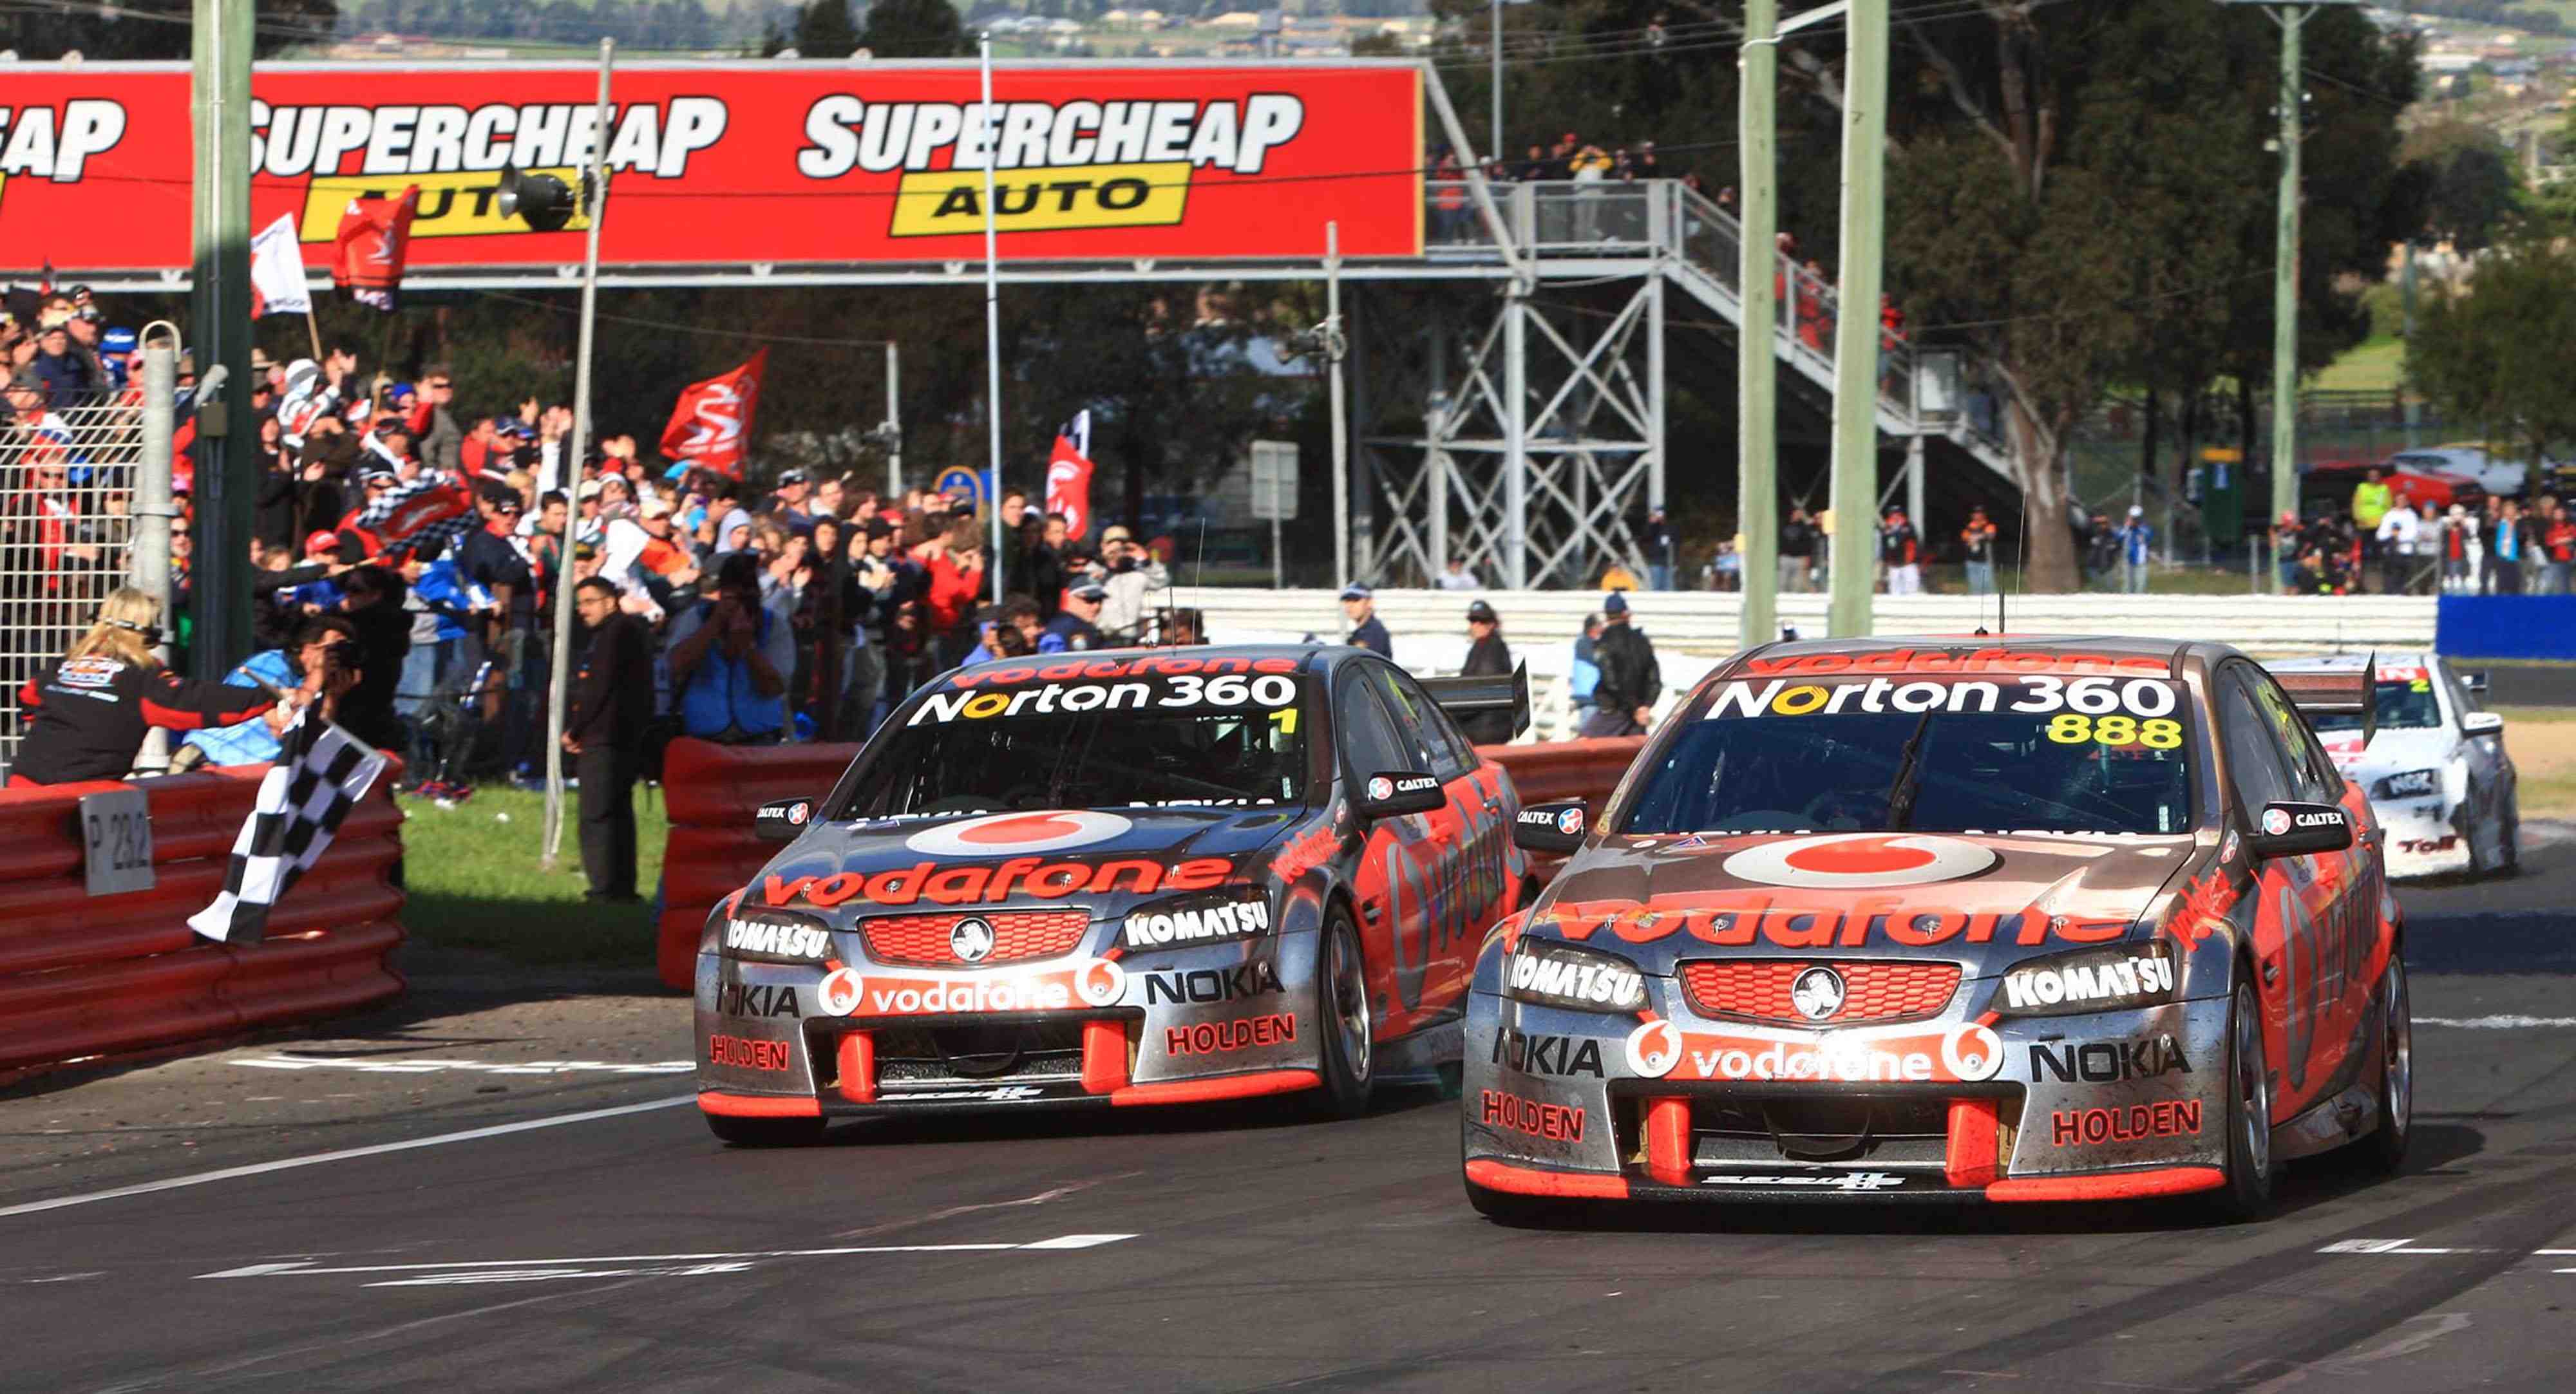 Jamie Whincup and Craig Lowndes cross the line for a crushing one-two result at Bathurst last week